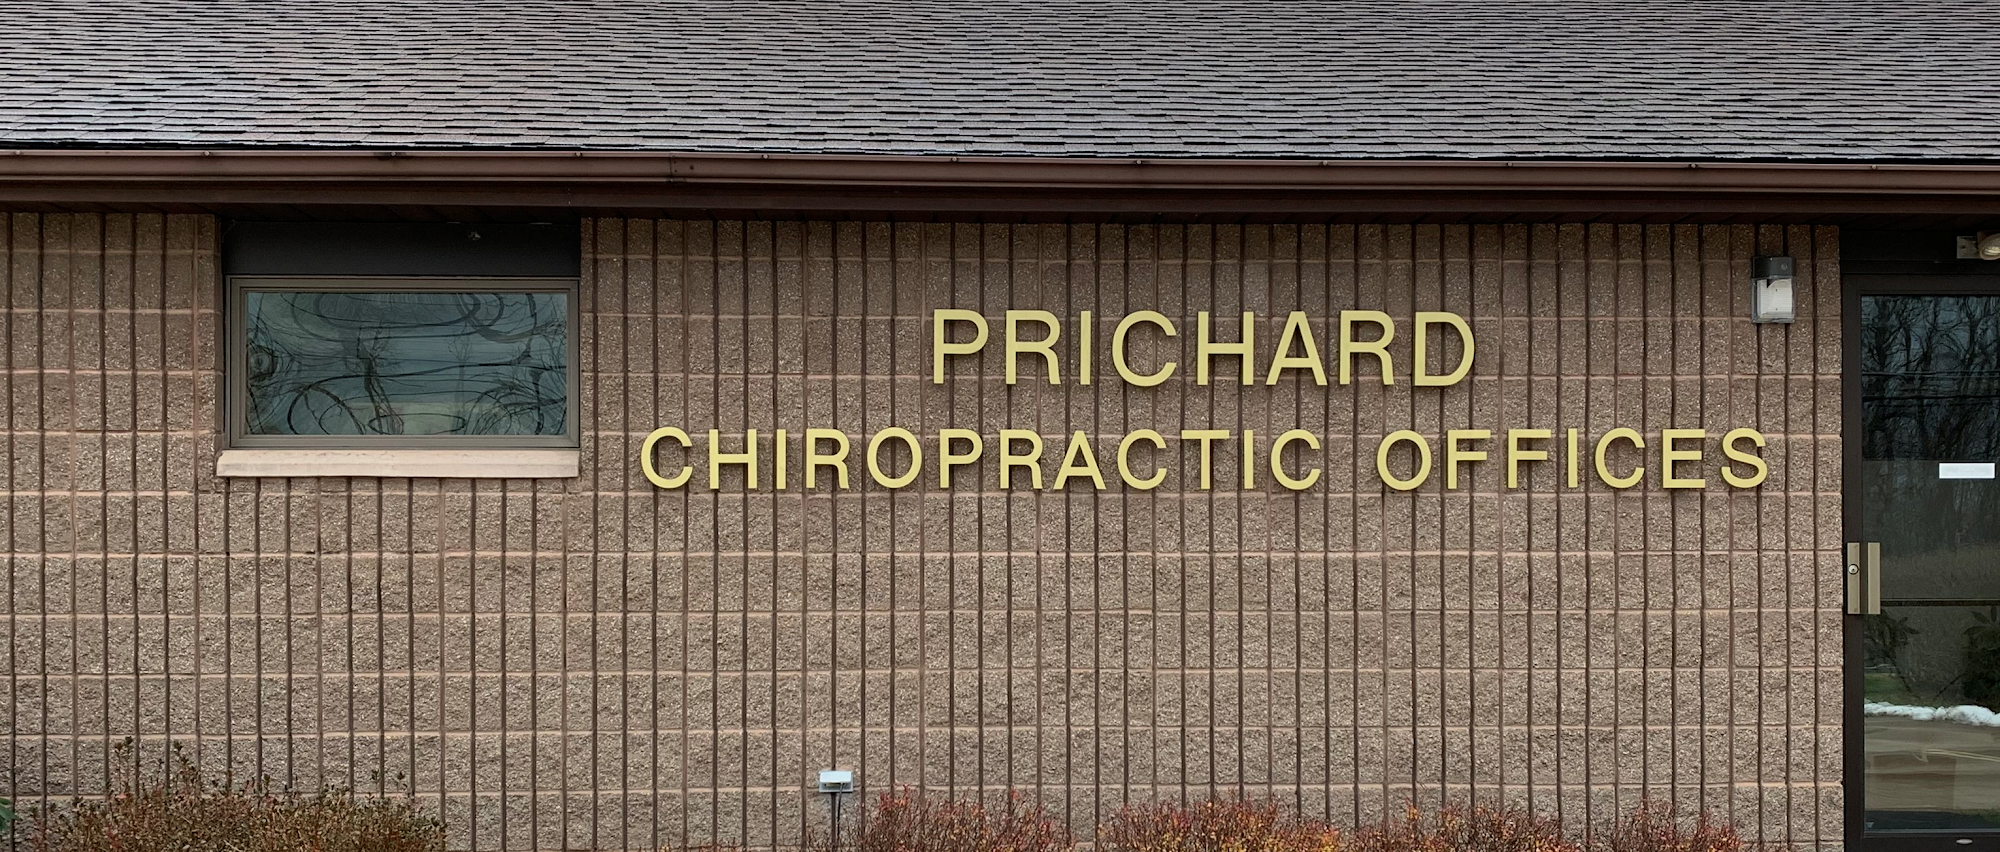 Prichard Chiropractic Offices